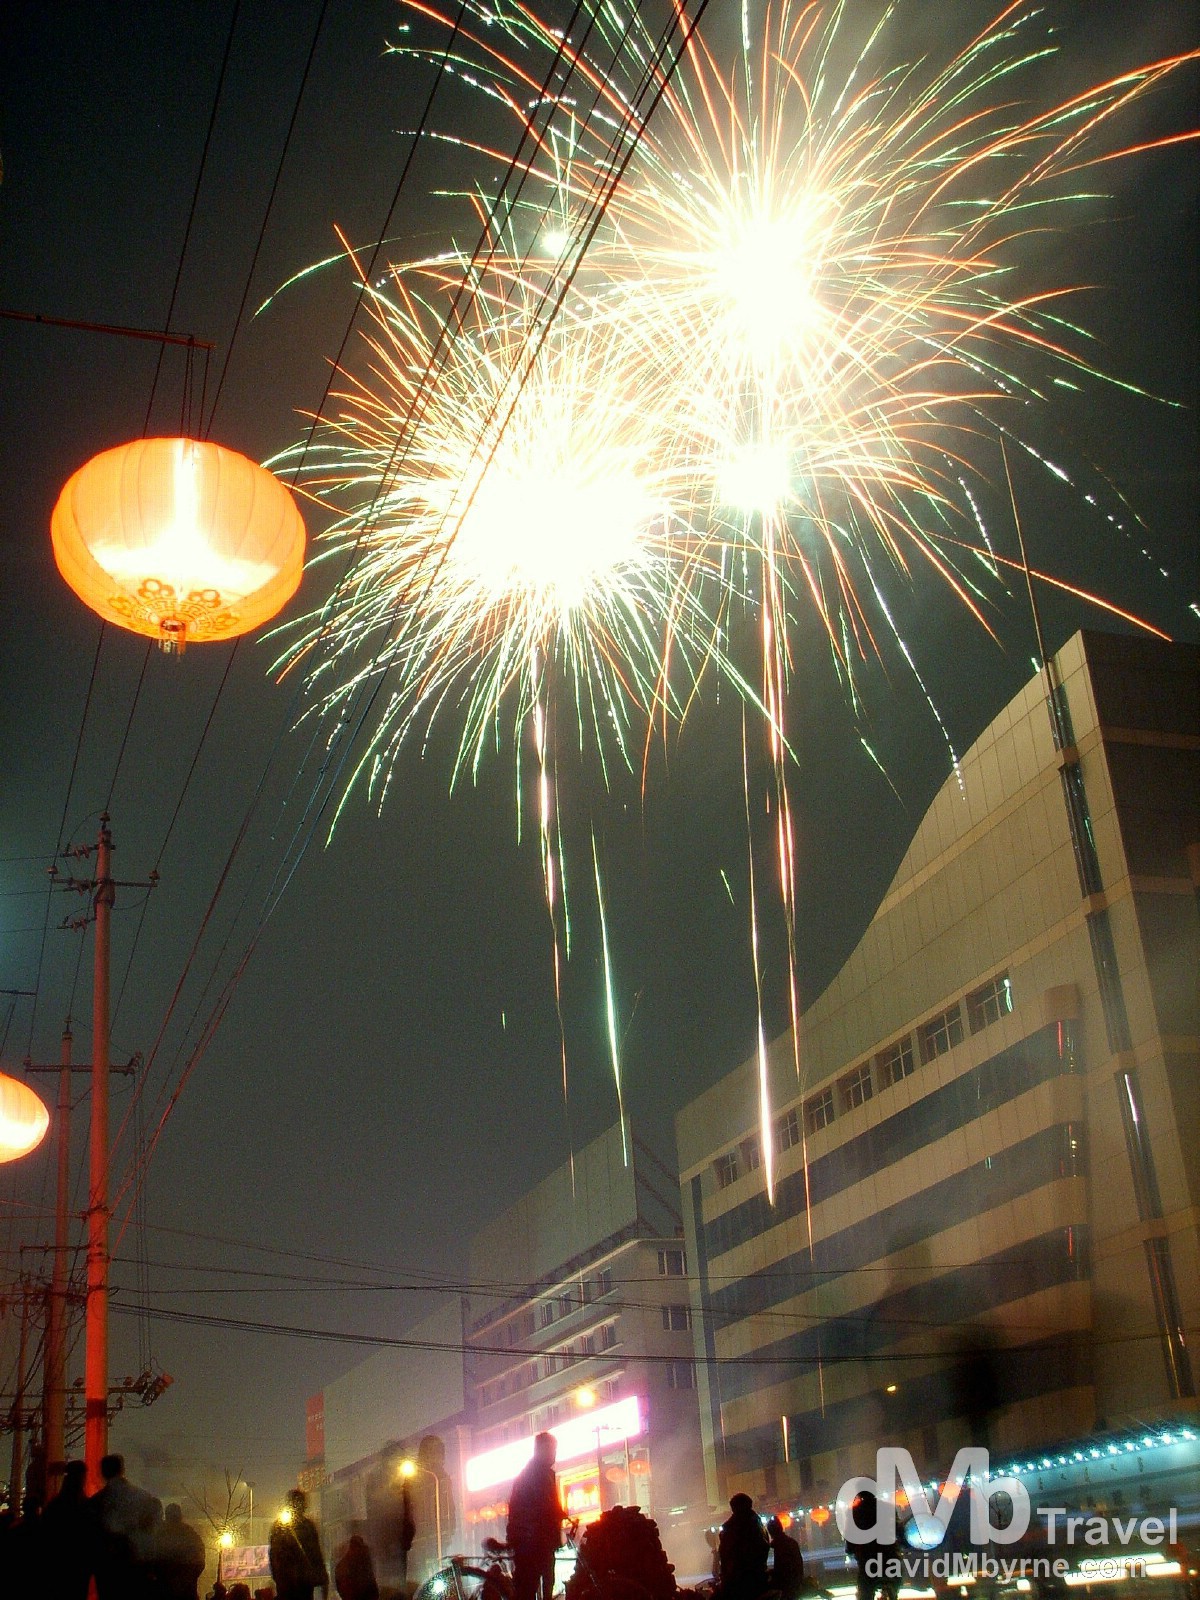 Chinese New Year celebration fireworks on the streets of Hohhot, Inner Mongolia, China. February 12, 2006. 